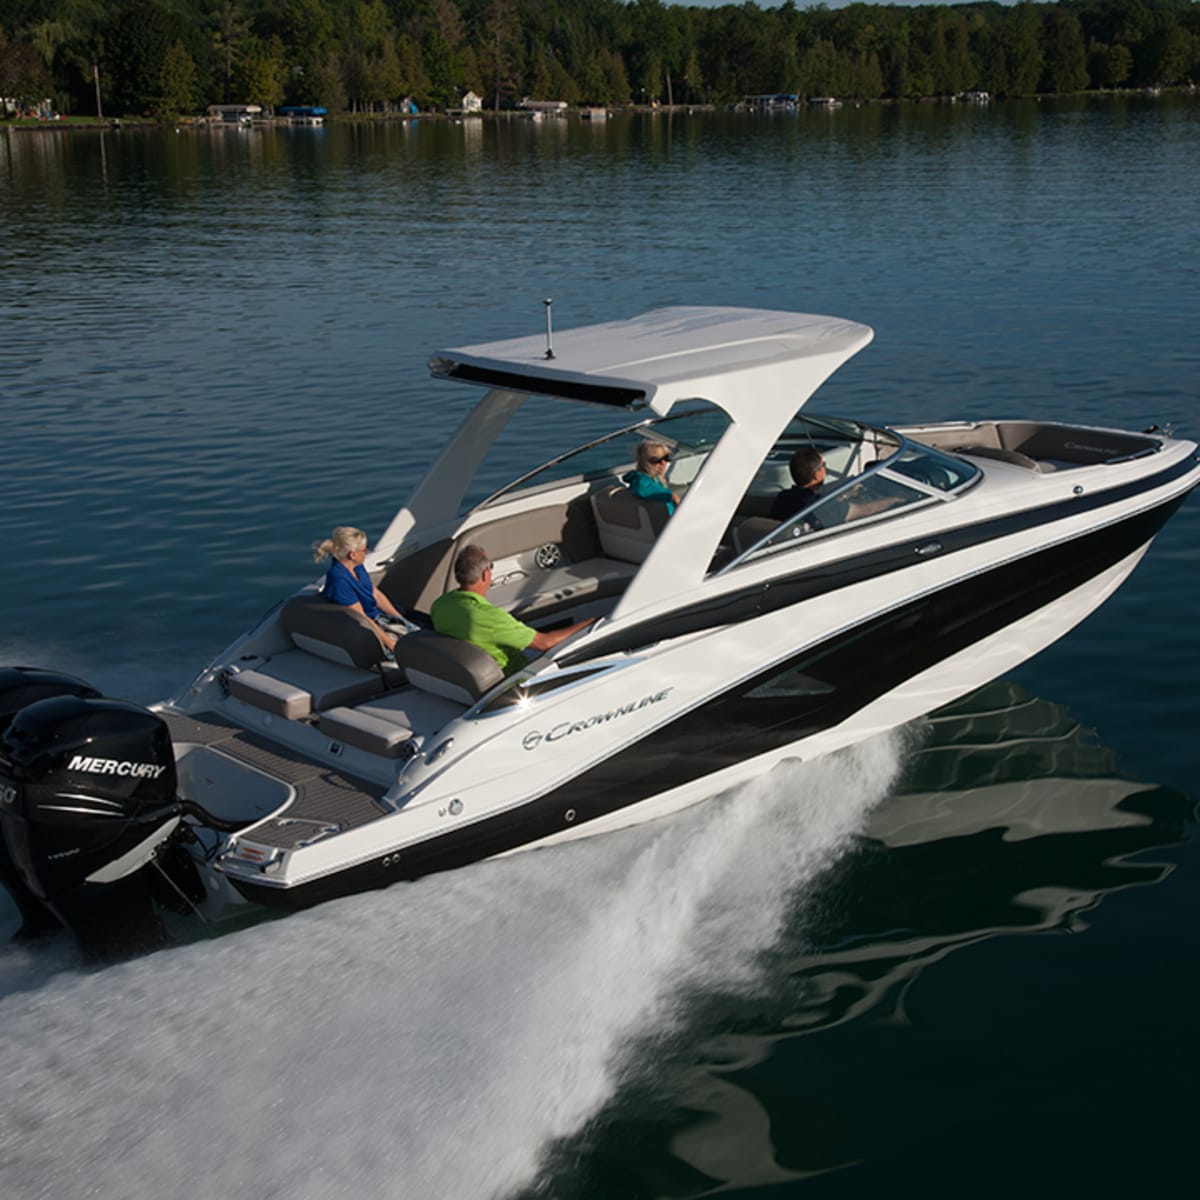 To Give You An Idea Of How Good Crownline Boats Are: